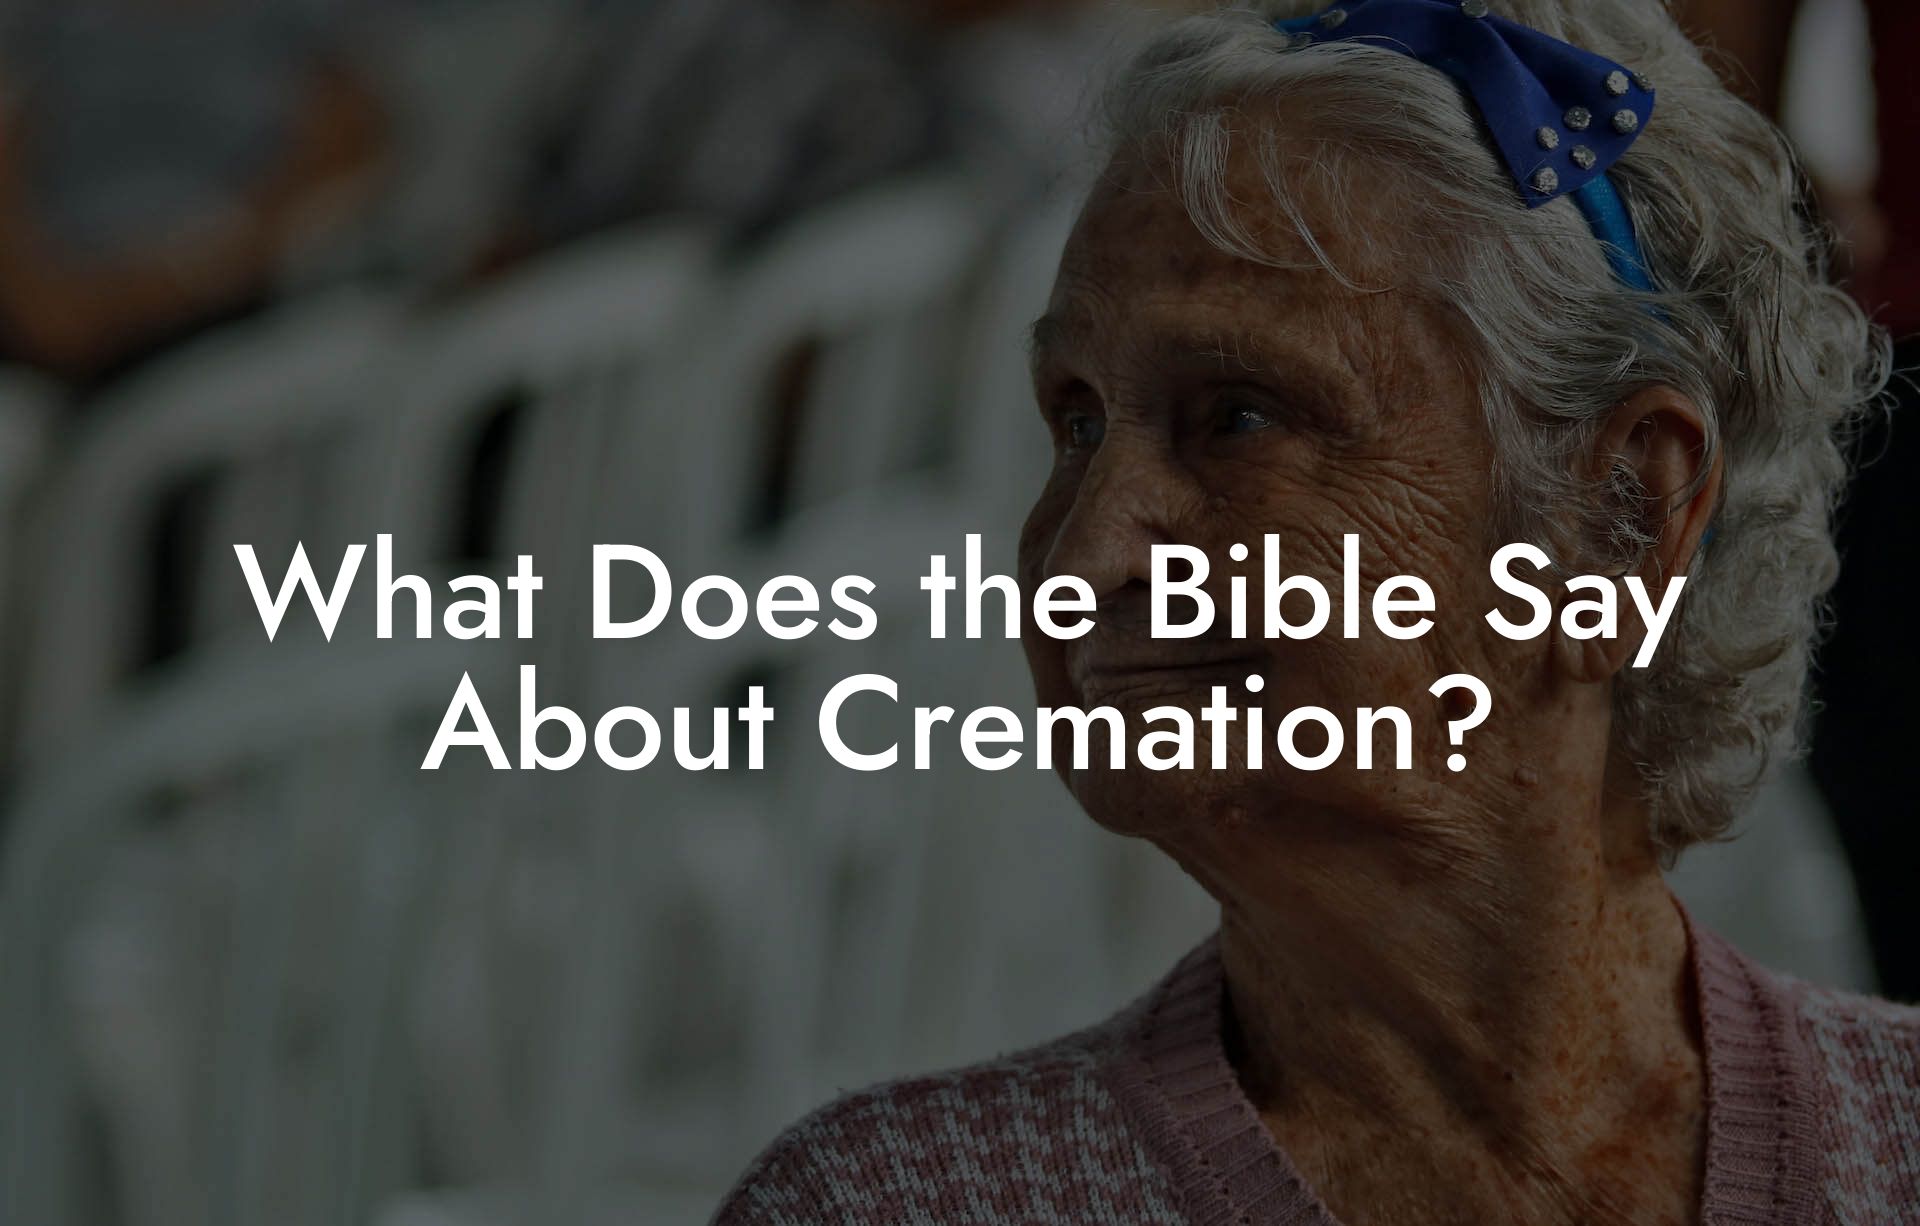 What Does the Bible Say About Cremation